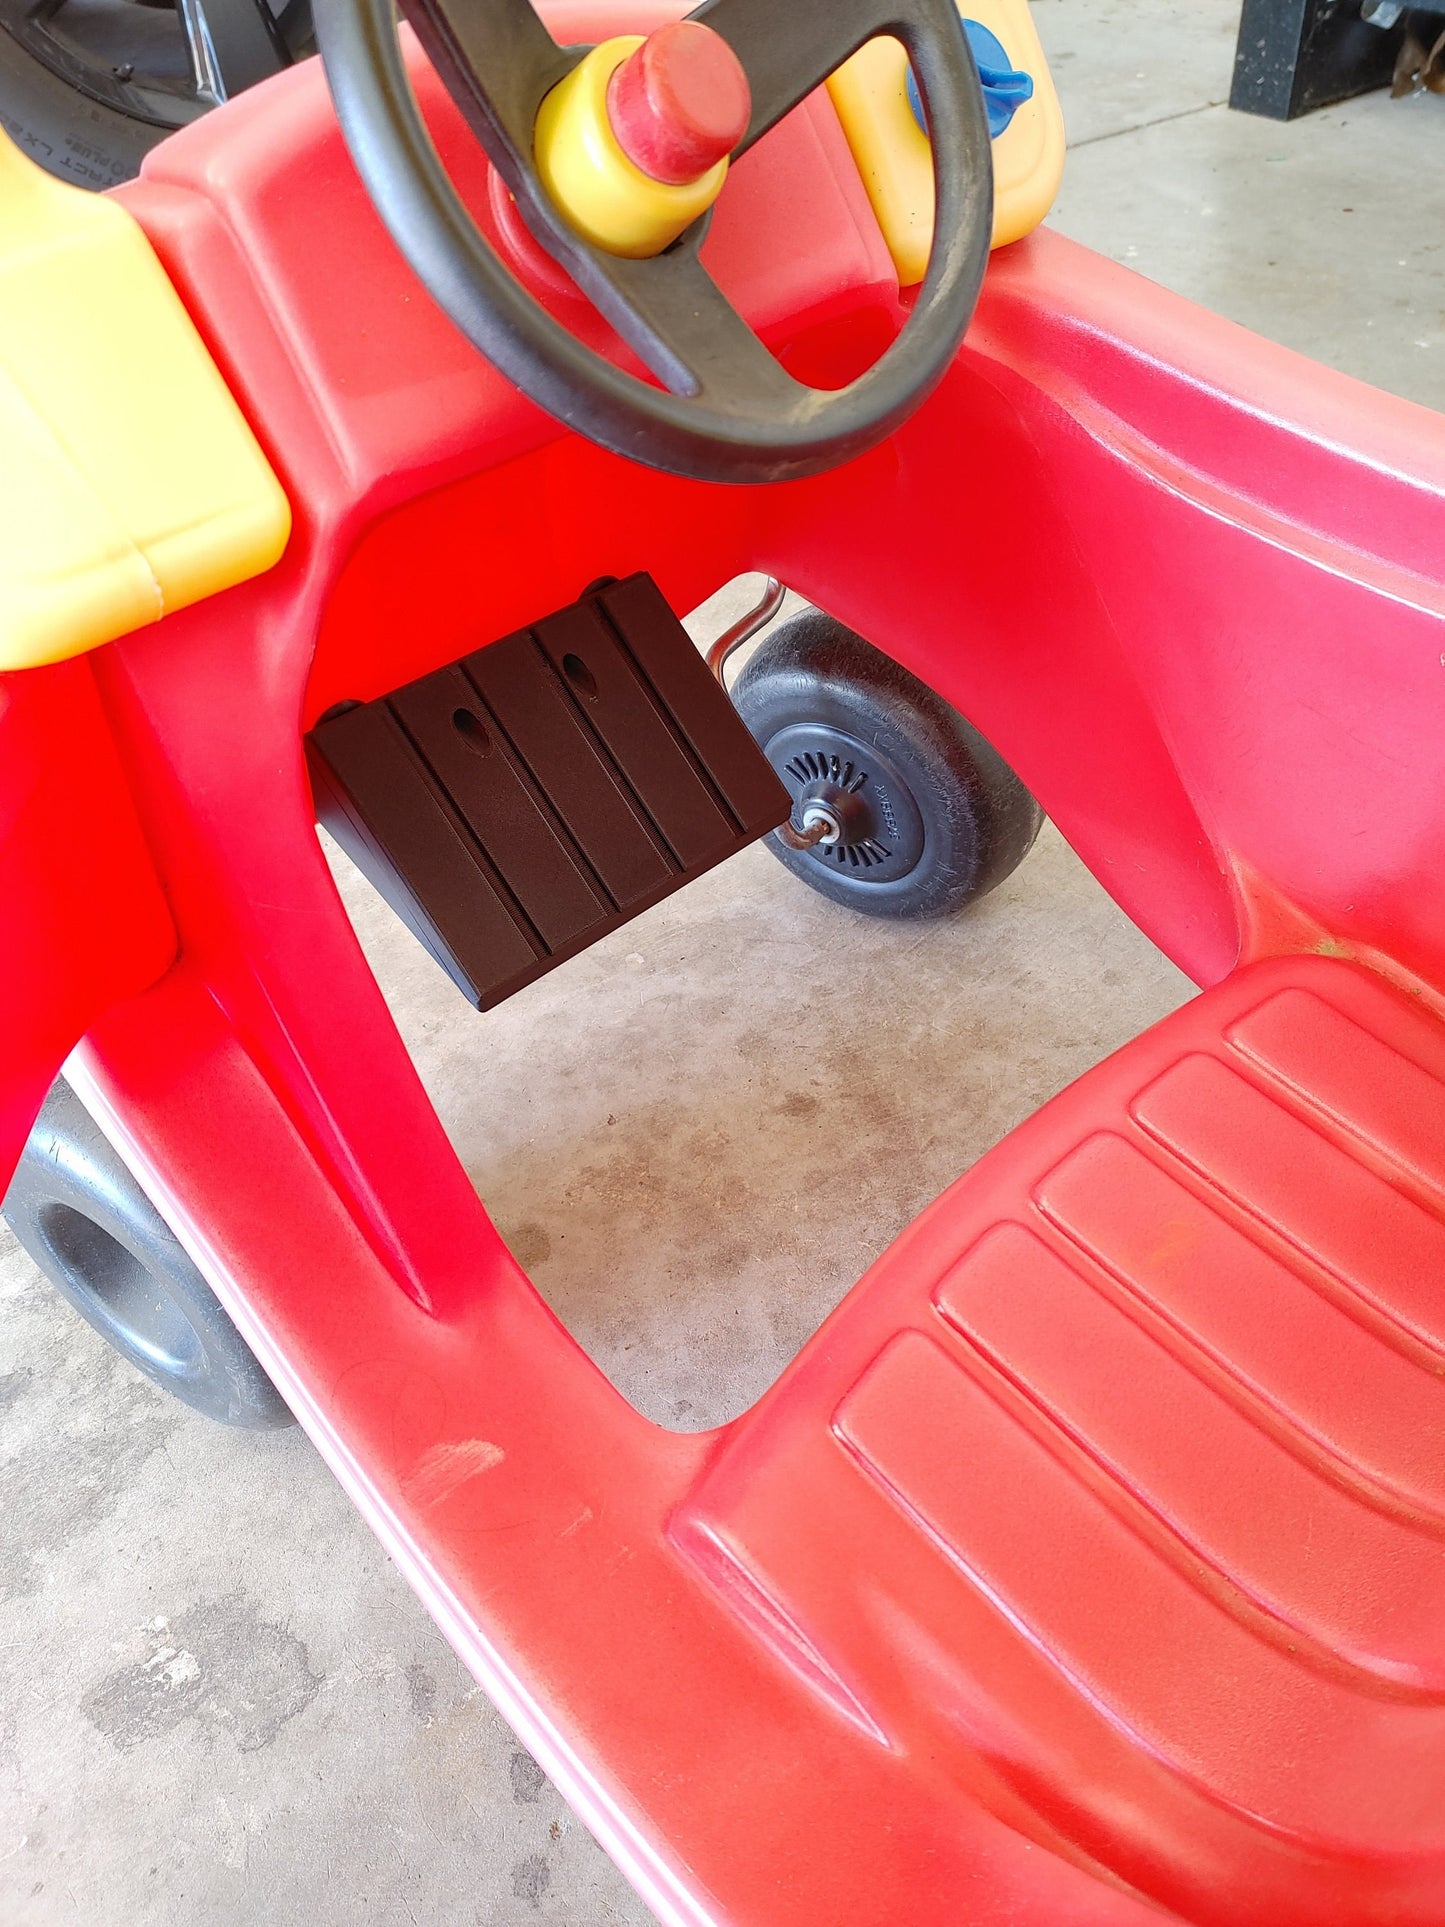 Foot Rest/ Floor Board Designed to be Compatible with the OLDER Little Tikes Cozy Coupe Push Car